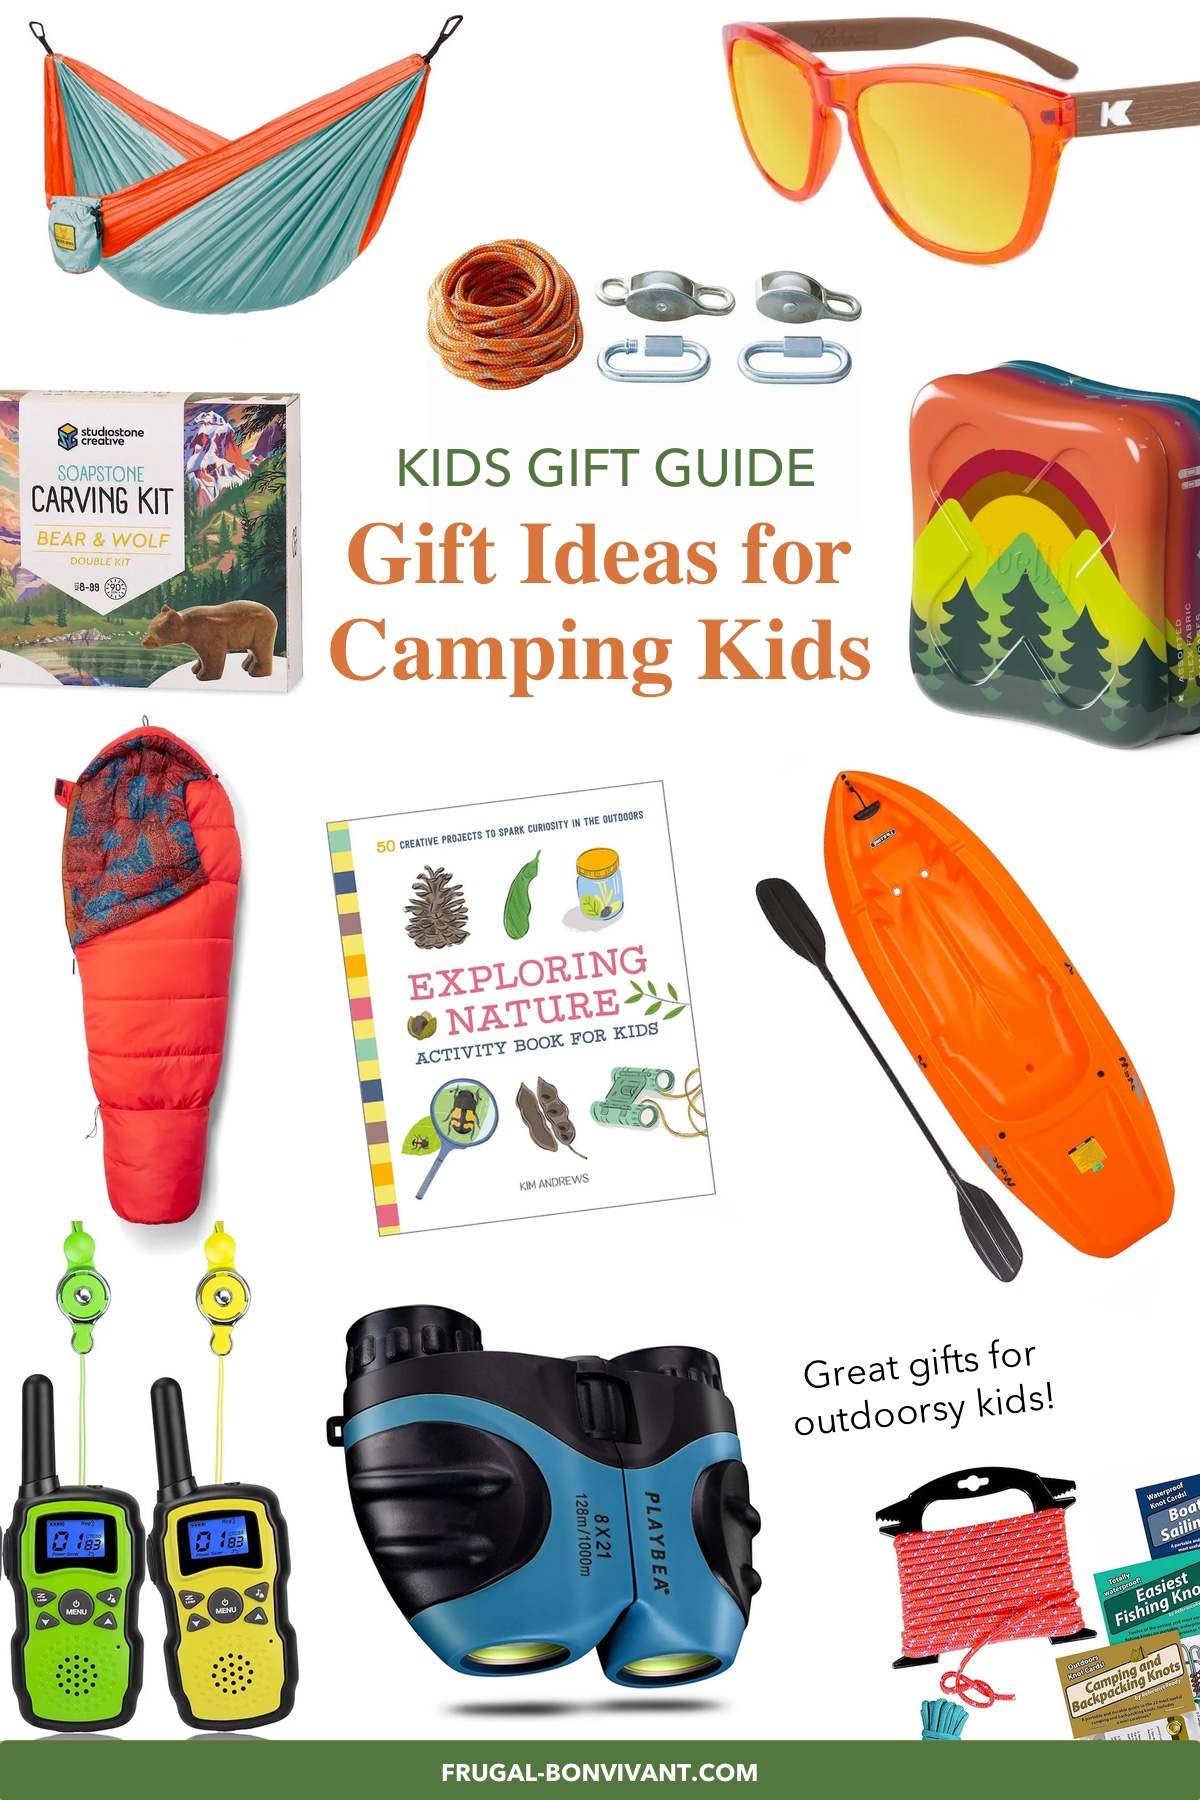 32 Kids Camping Gift Ideas Outdoorsy Kids Will Love